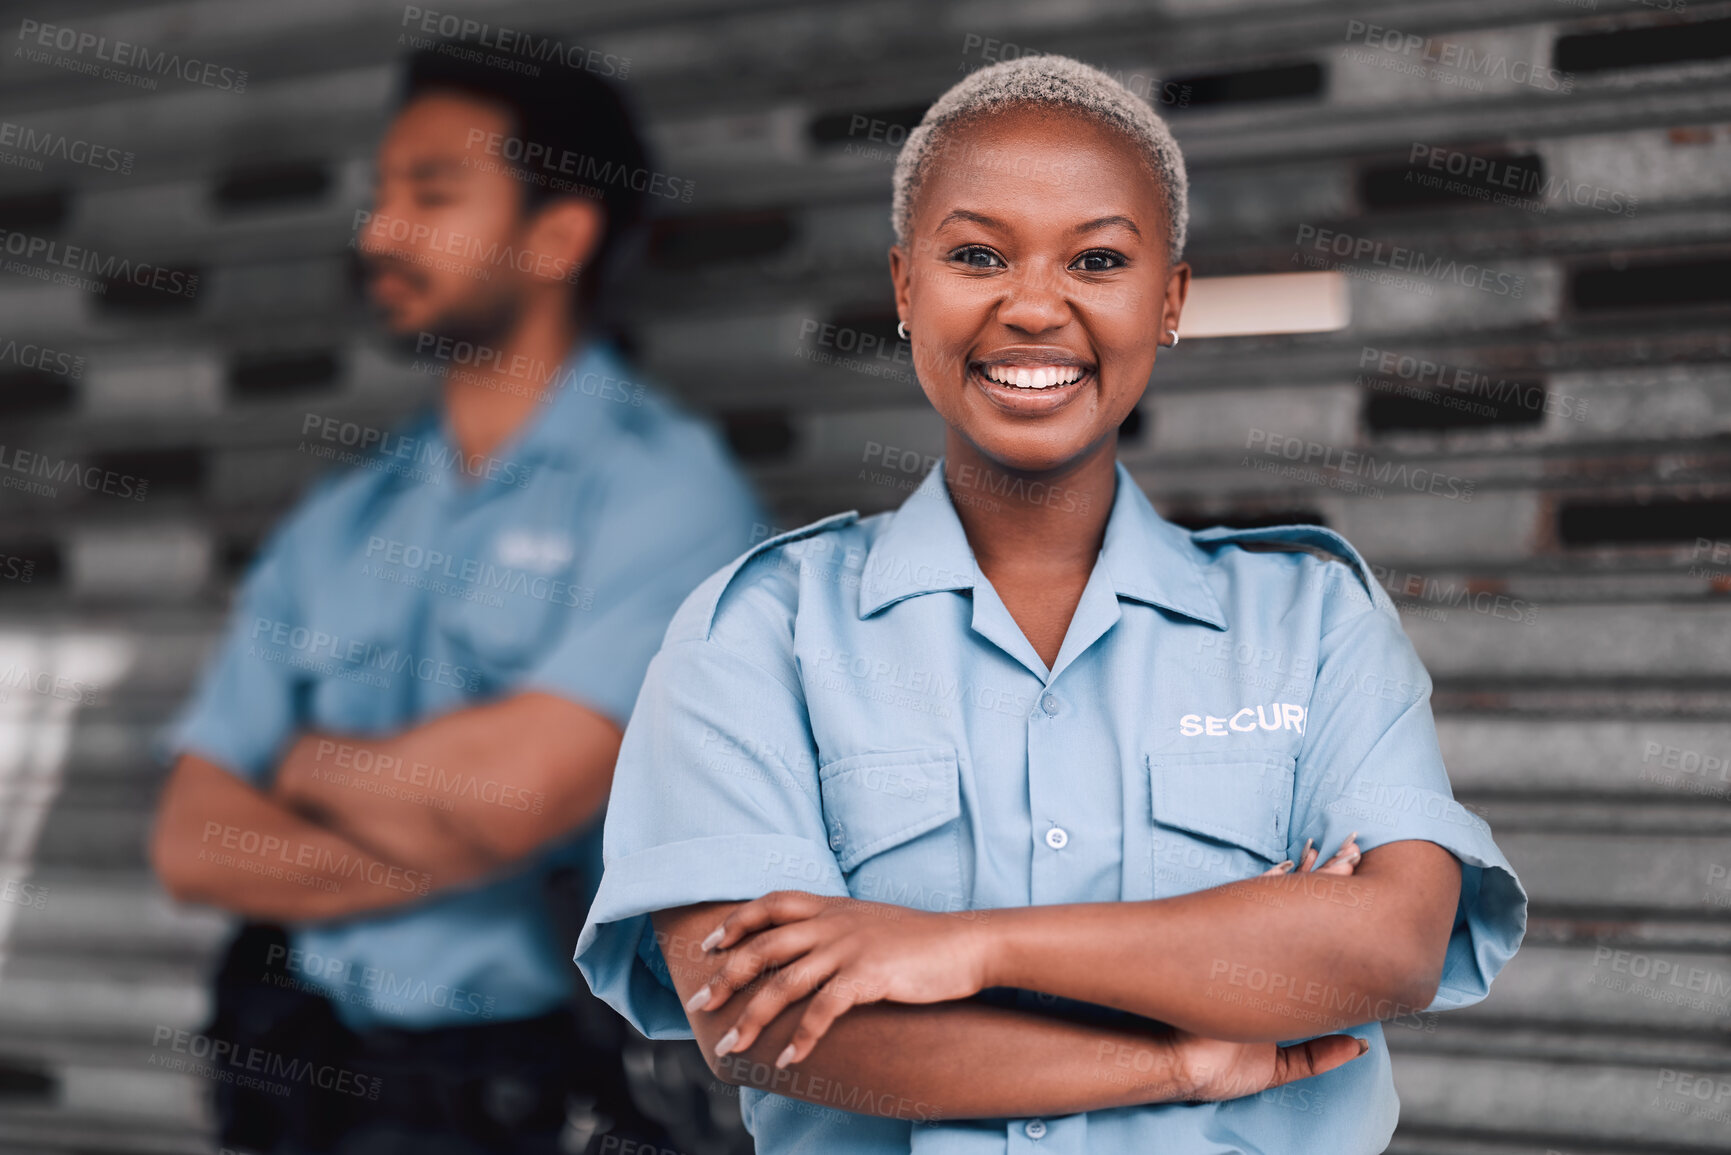 Buy stock photo Portrait, security or law enforcement and a happy black woman arms crossed with a man colleague on the street. Safety, smile and duty with a crime prevention unity working as a team in an urban city